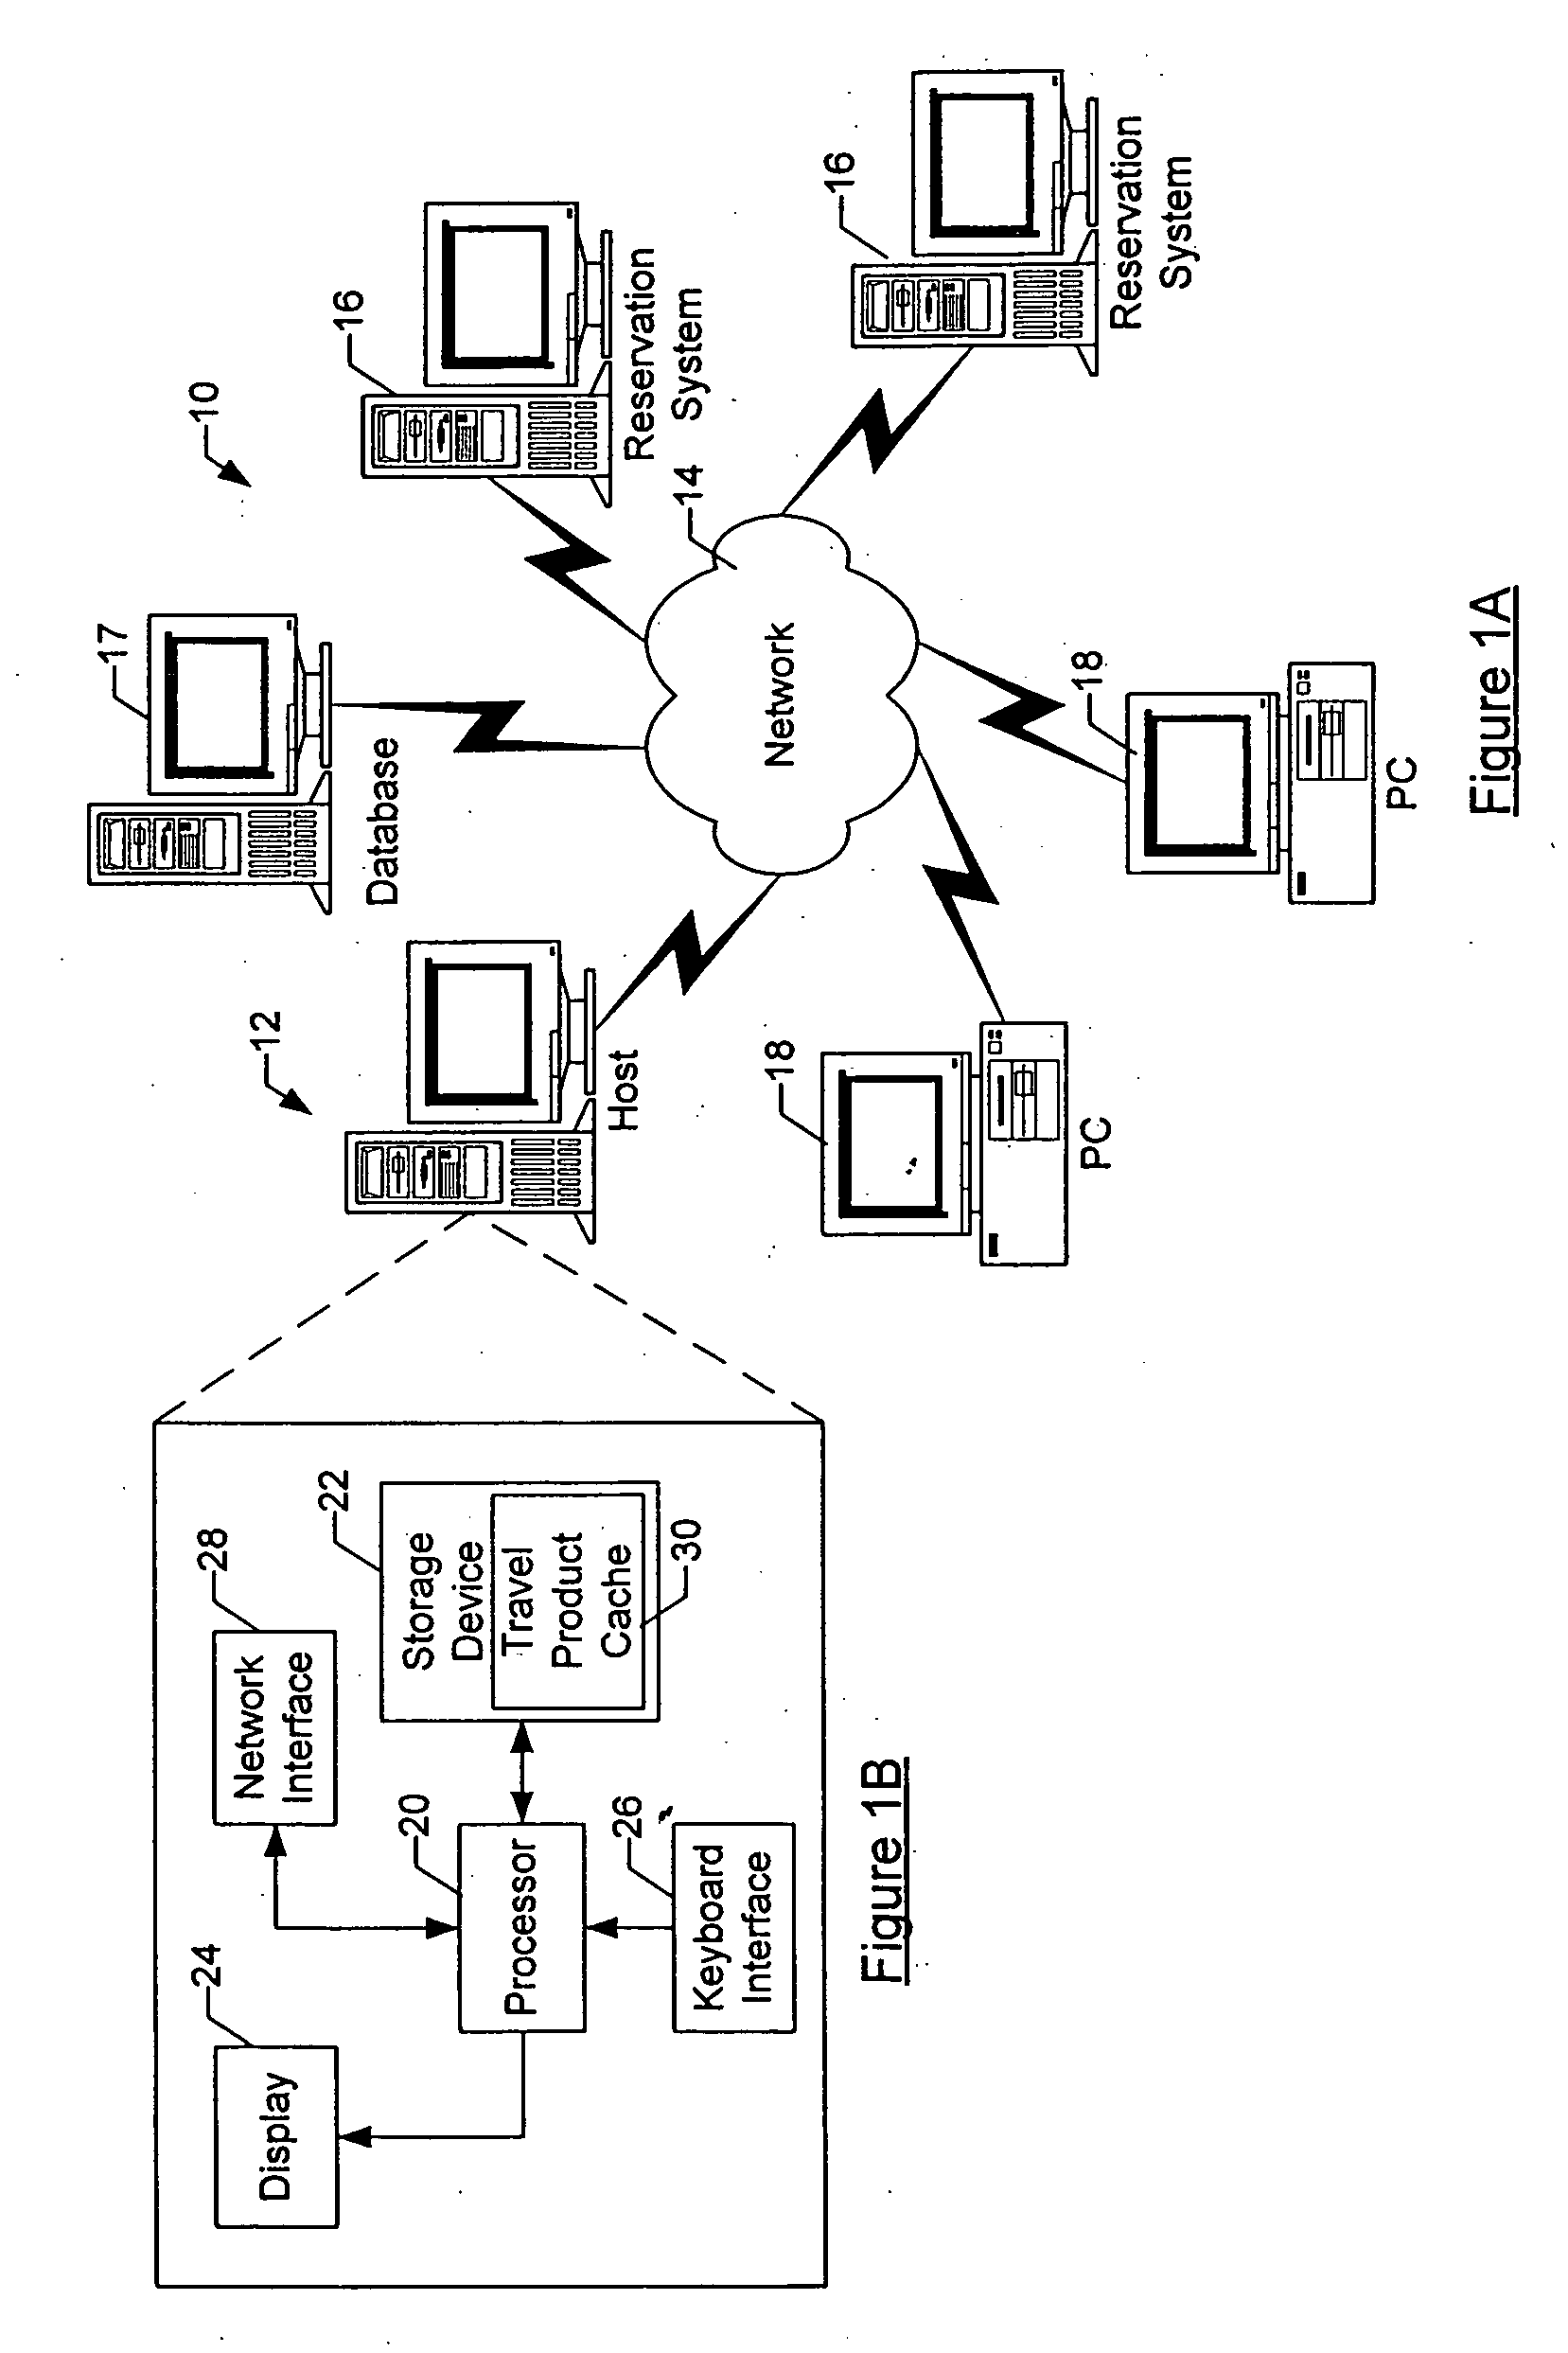 System, method, and computer program product for detecting and resolving pricing errors for products listed in an inventory system